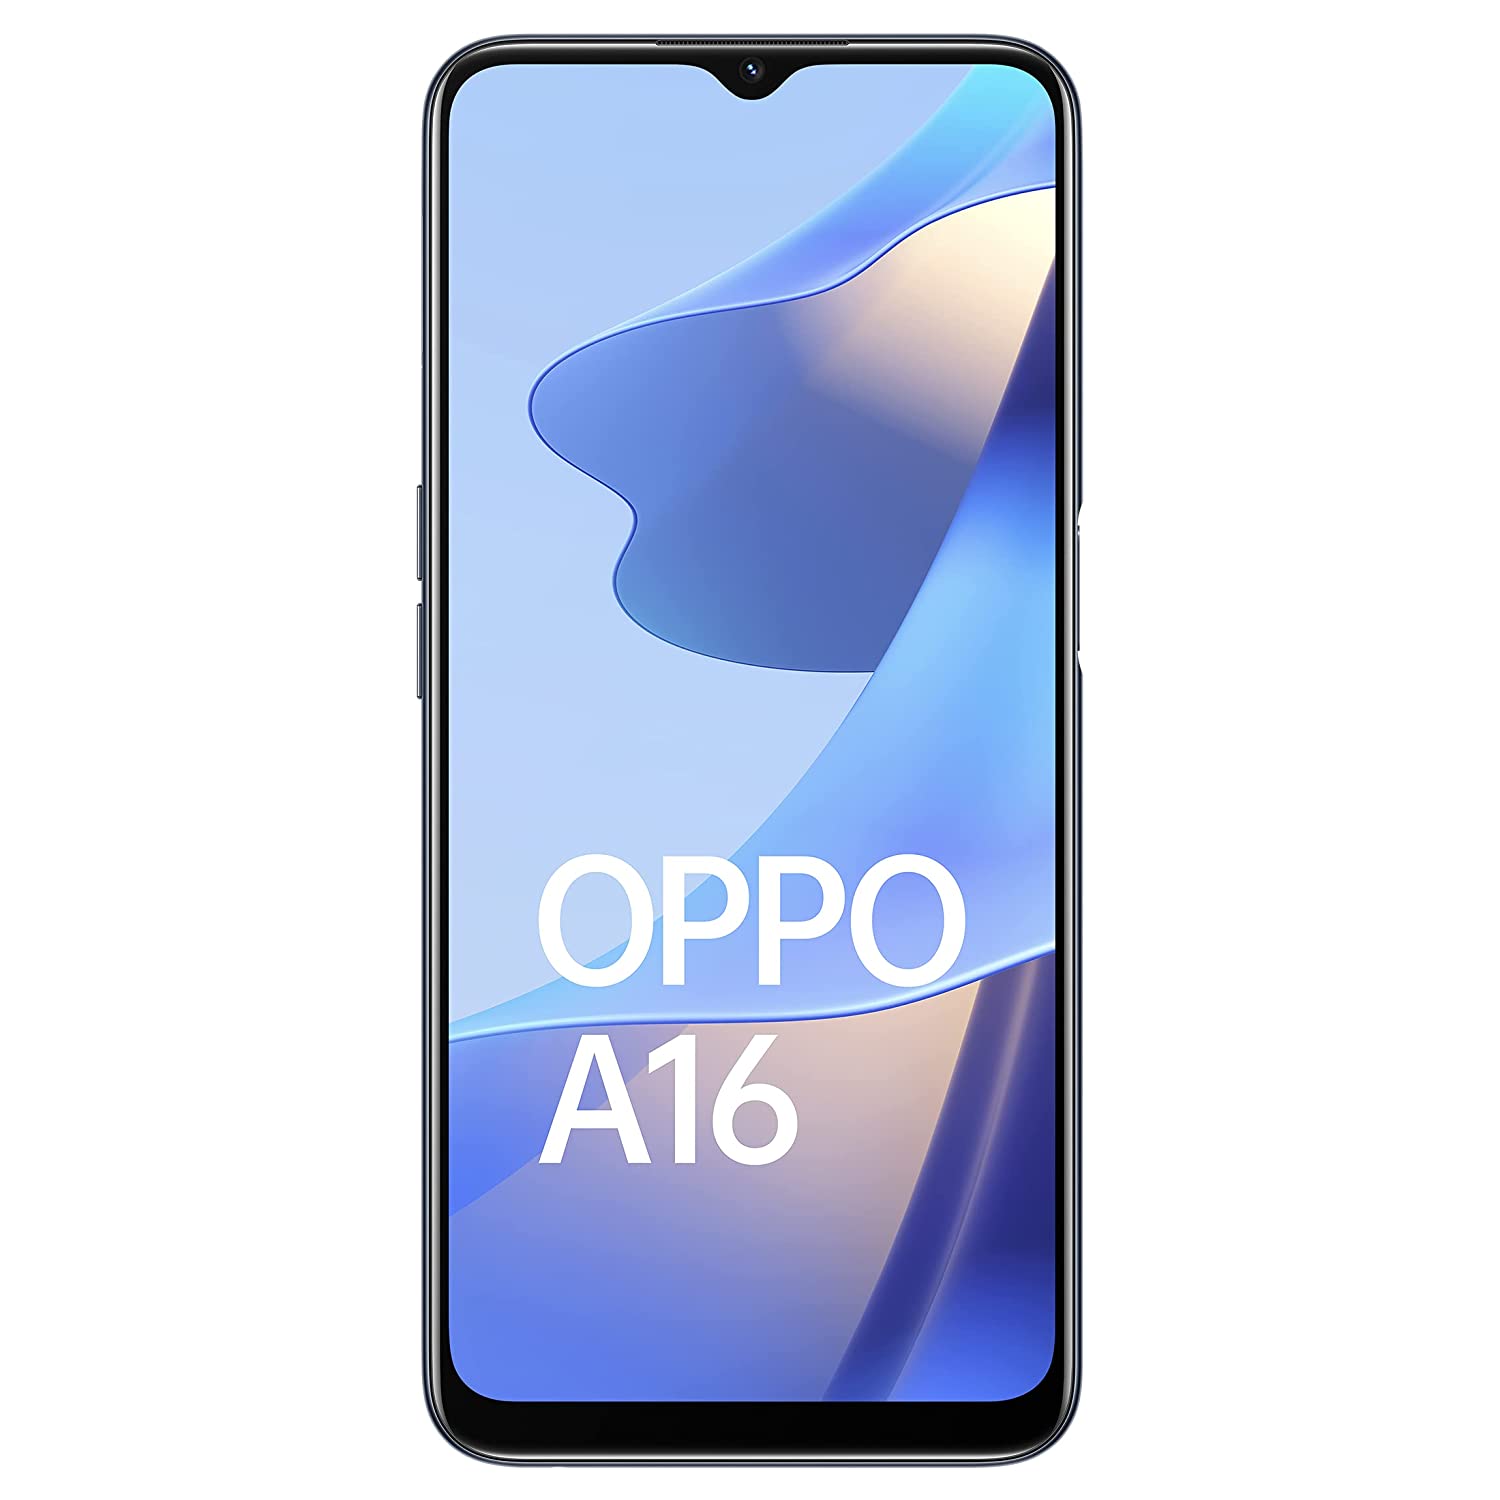 Oppo A16 Offer | Avail Up To 10% Instant Discount